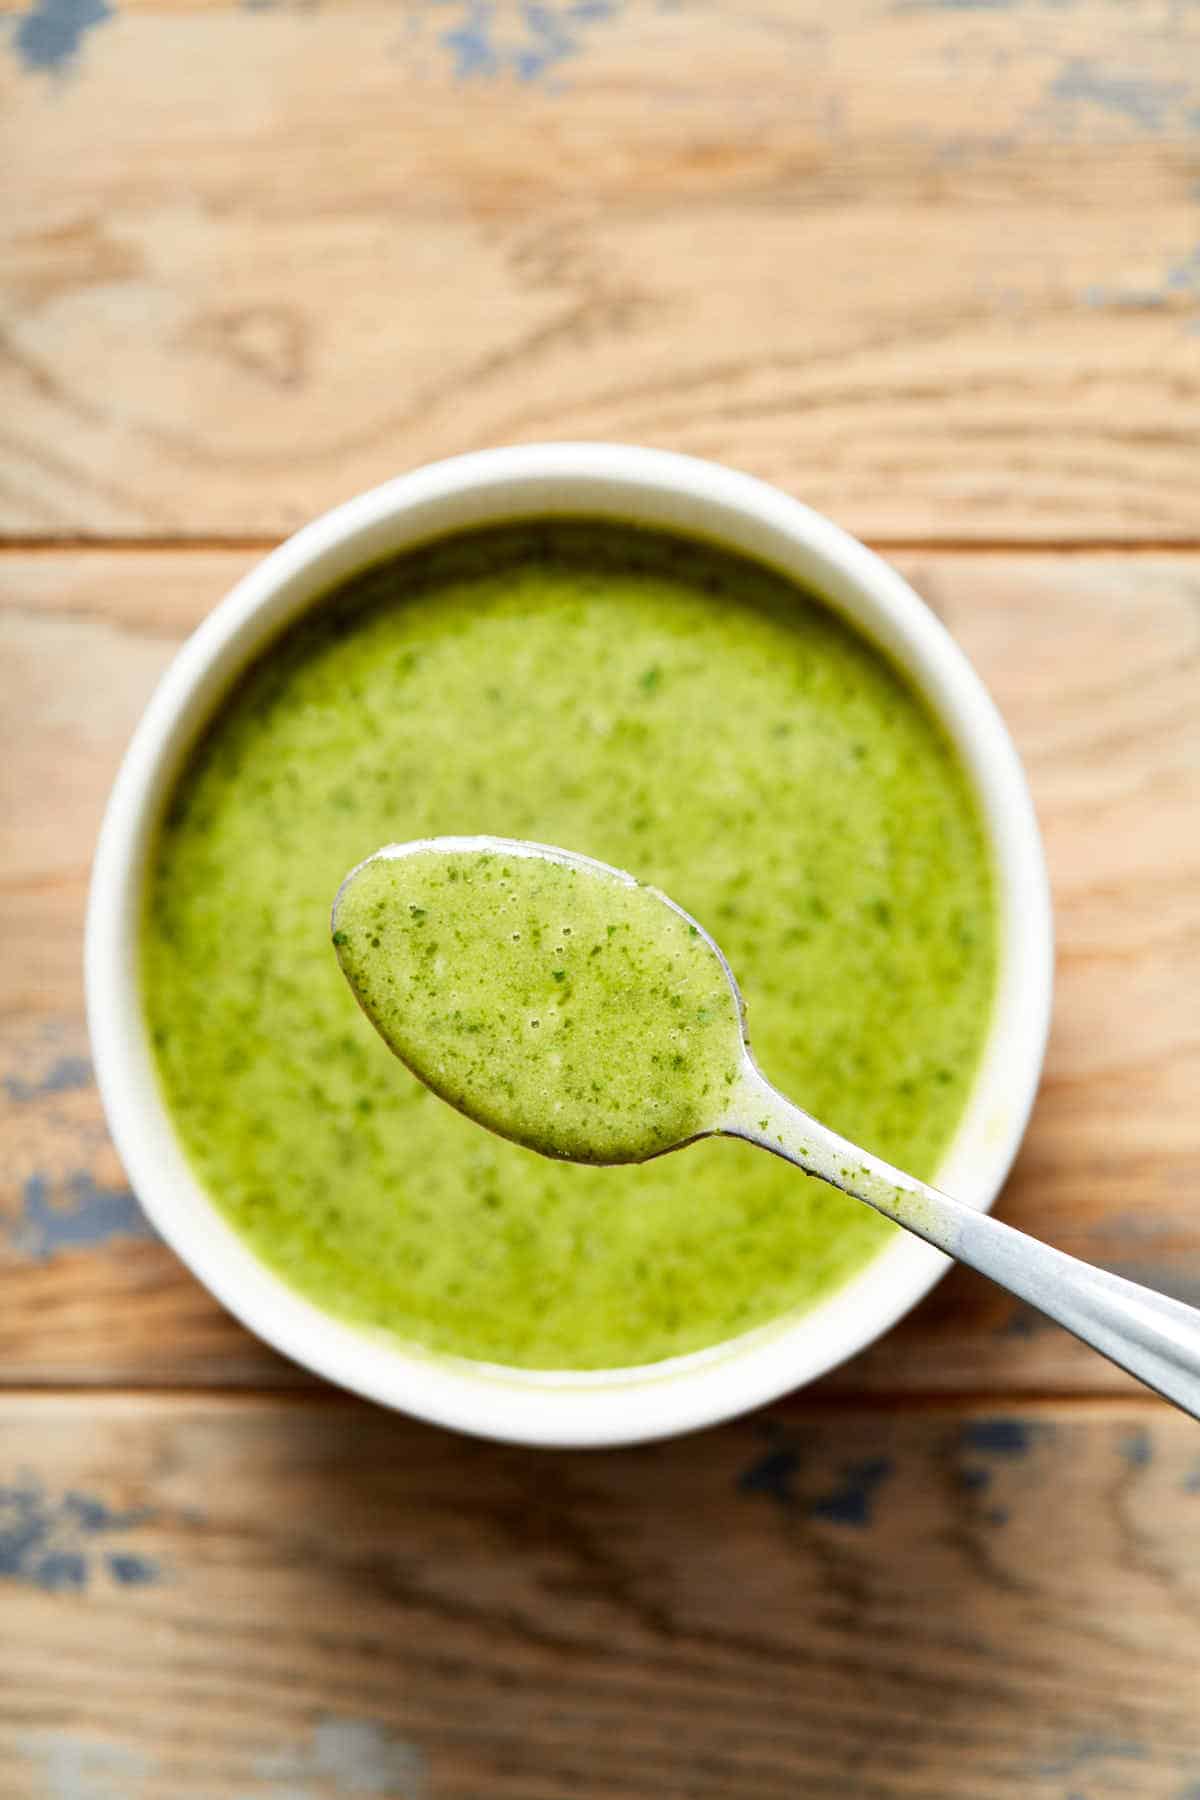 Overhead view of a bowl of jalapeño vinaigrette with a spoonful lifted out to show the texture.